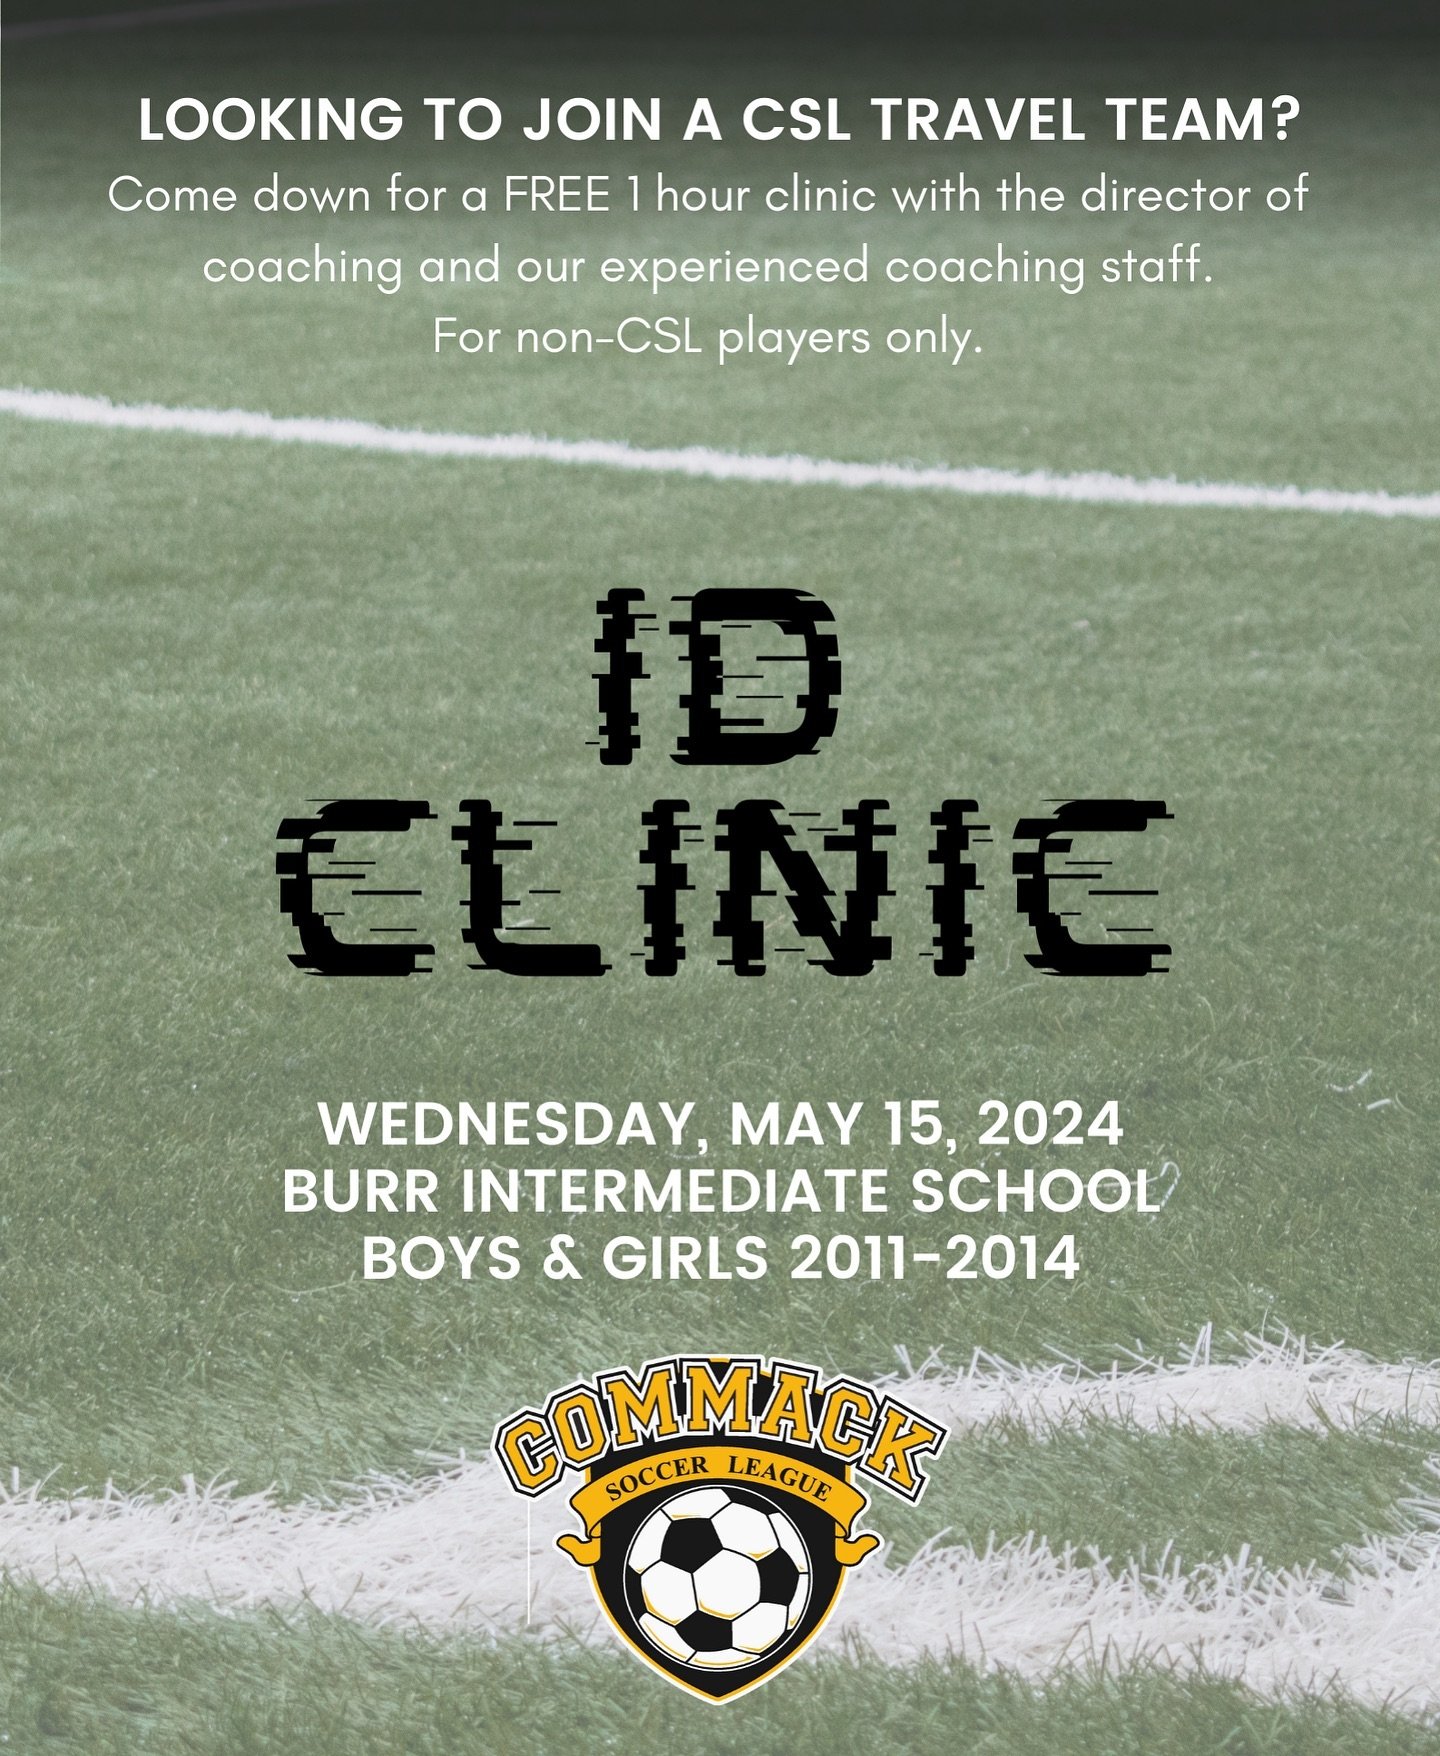 Don&rsquo;t miss out on our free Travel Player ID Clinic TOMORROW, Wednesday, May 15! This clinic is open to non-CSL players only. For more information and to register, click the link in our bio! 🔗⚽️ #CommackSoccer #CommackSoccerLeague